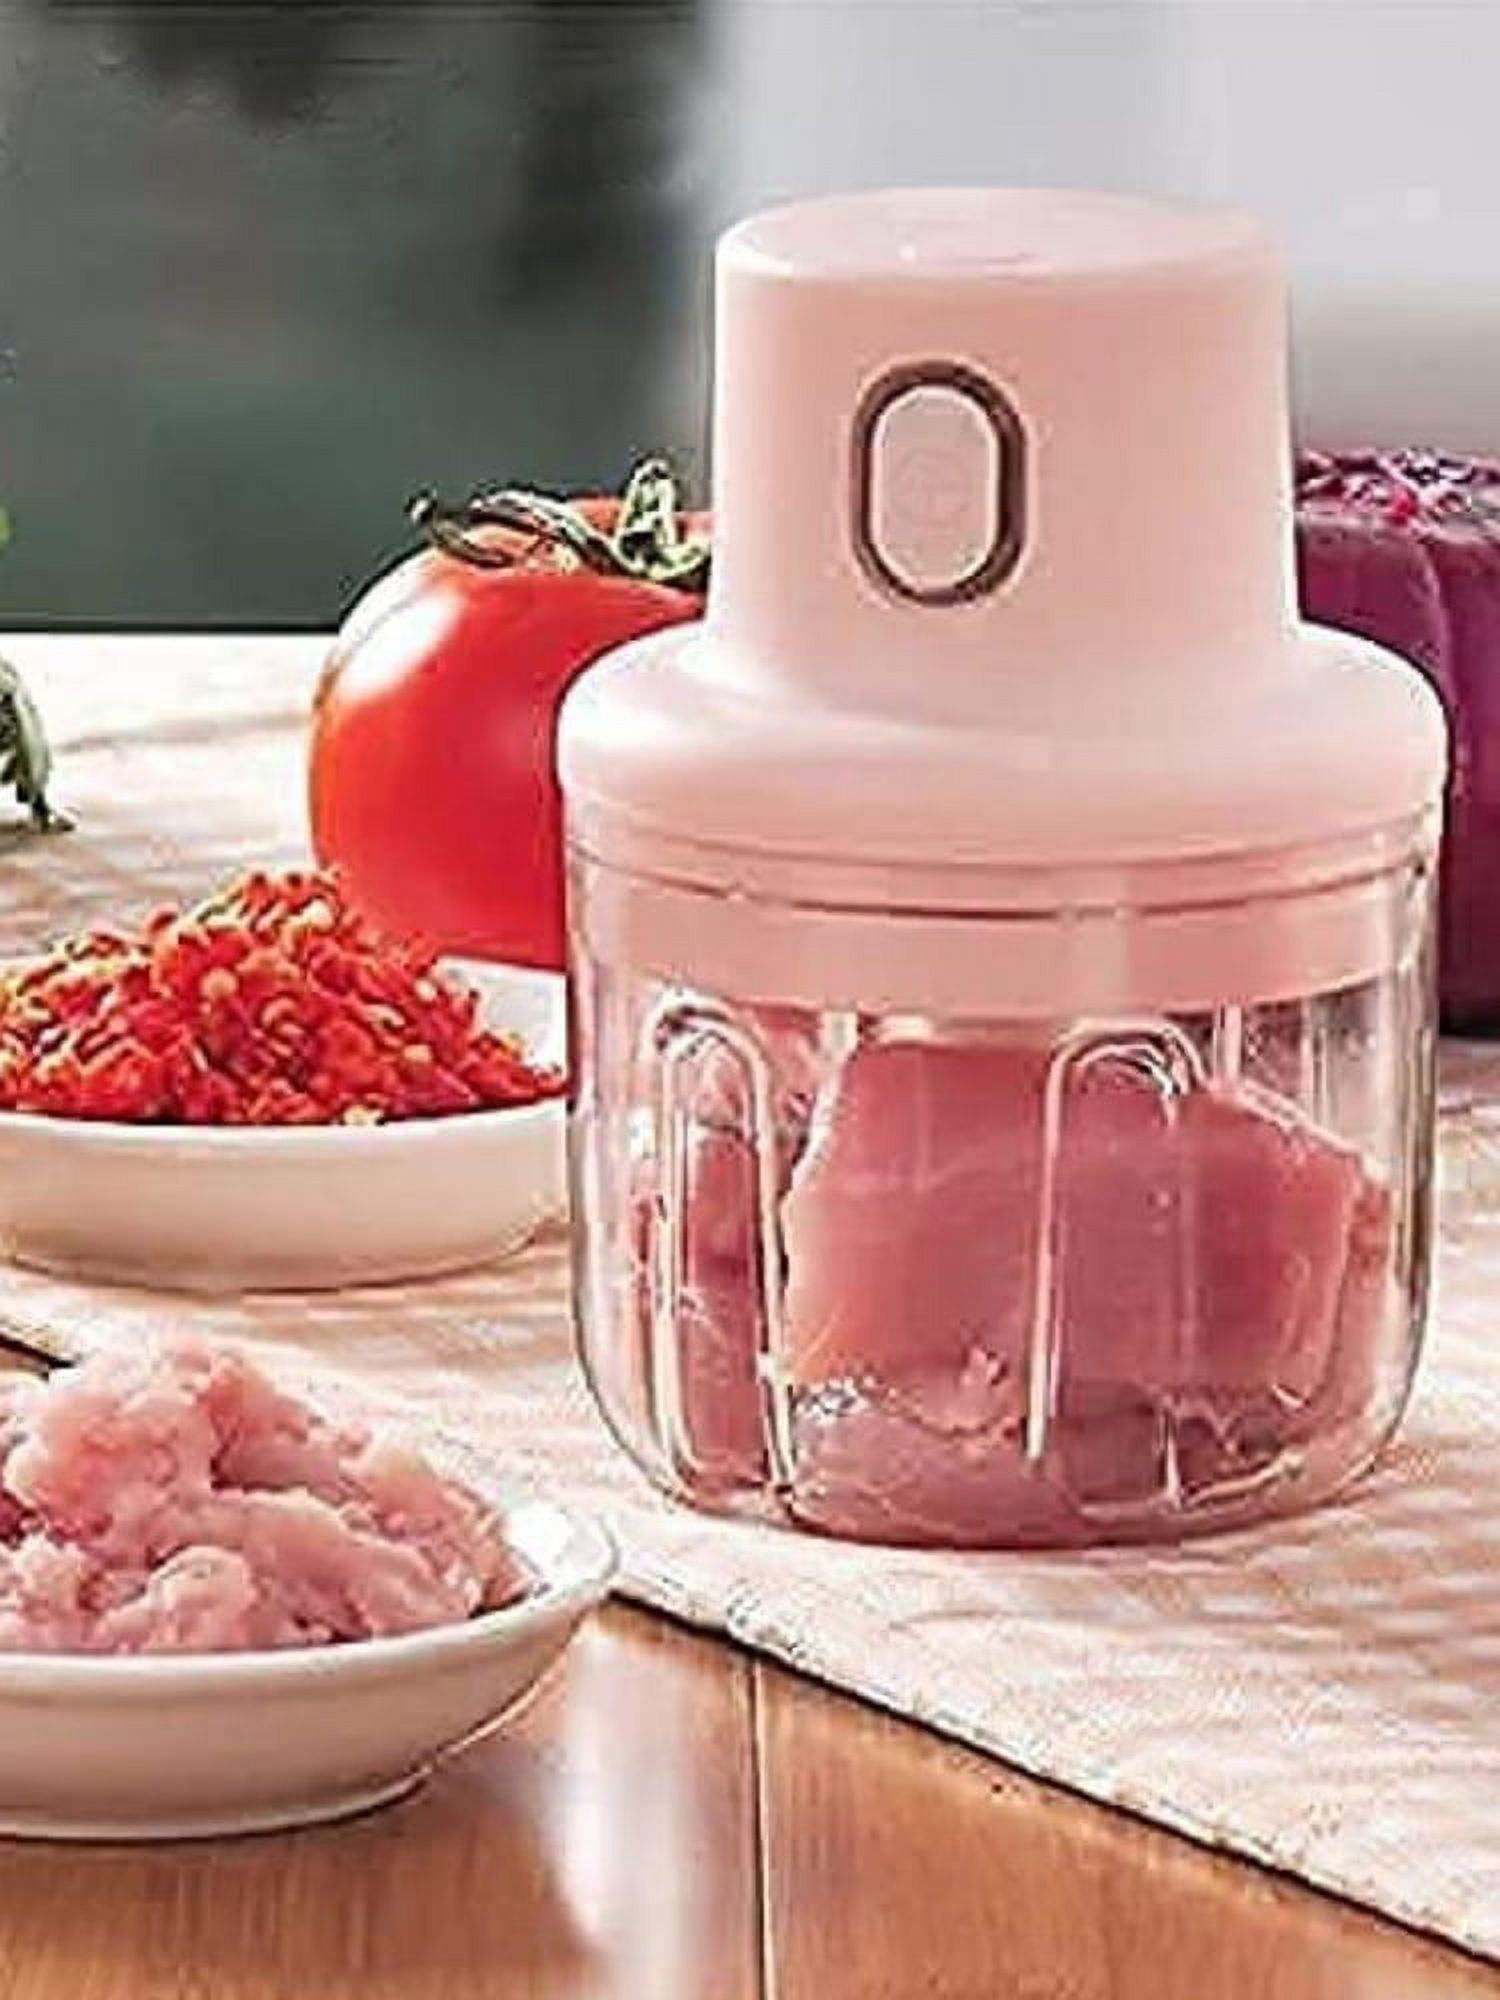 Cook with Color Wireless Food Chopper - Effortlessly Chop, Perfect for Garlic, Ginger, Herbs, Chili, Minced Meat, Onions, 8 oz, Navy